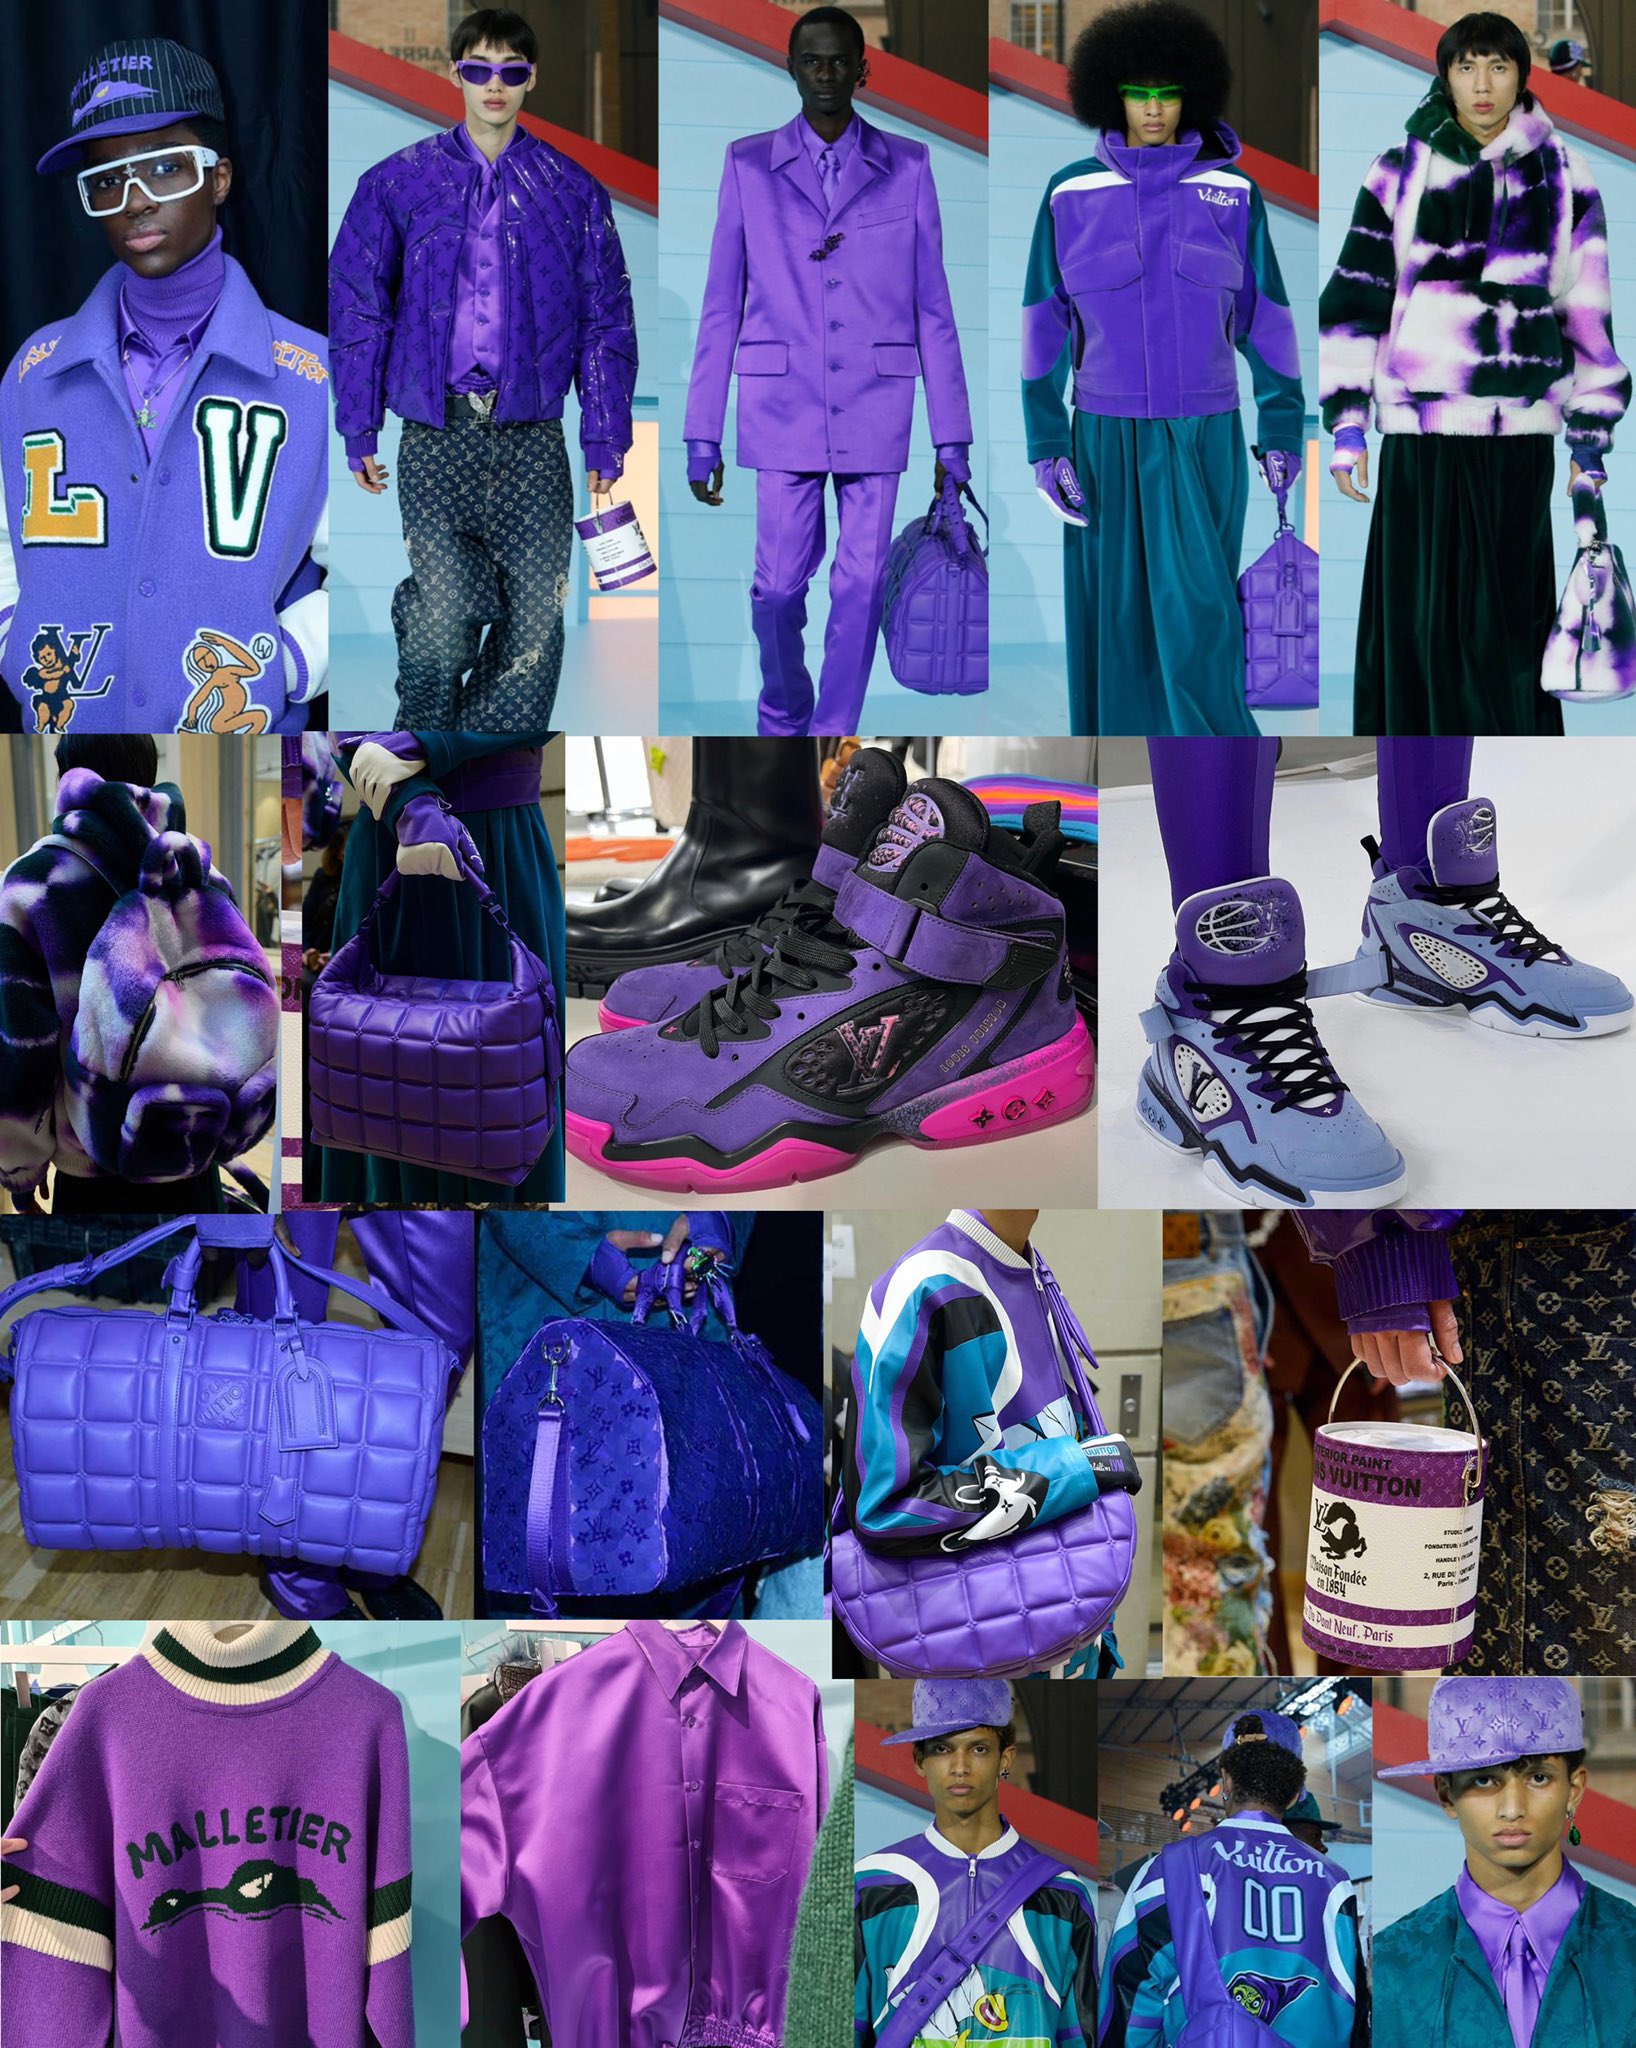 Bangtan Style⁷ (slow) on X: Some Purple items from the LOUIS VUITTON Fall  Winter 2022 Collection. 💜 #BTS #Butter #BTS_Butter @BTS_twt   / X